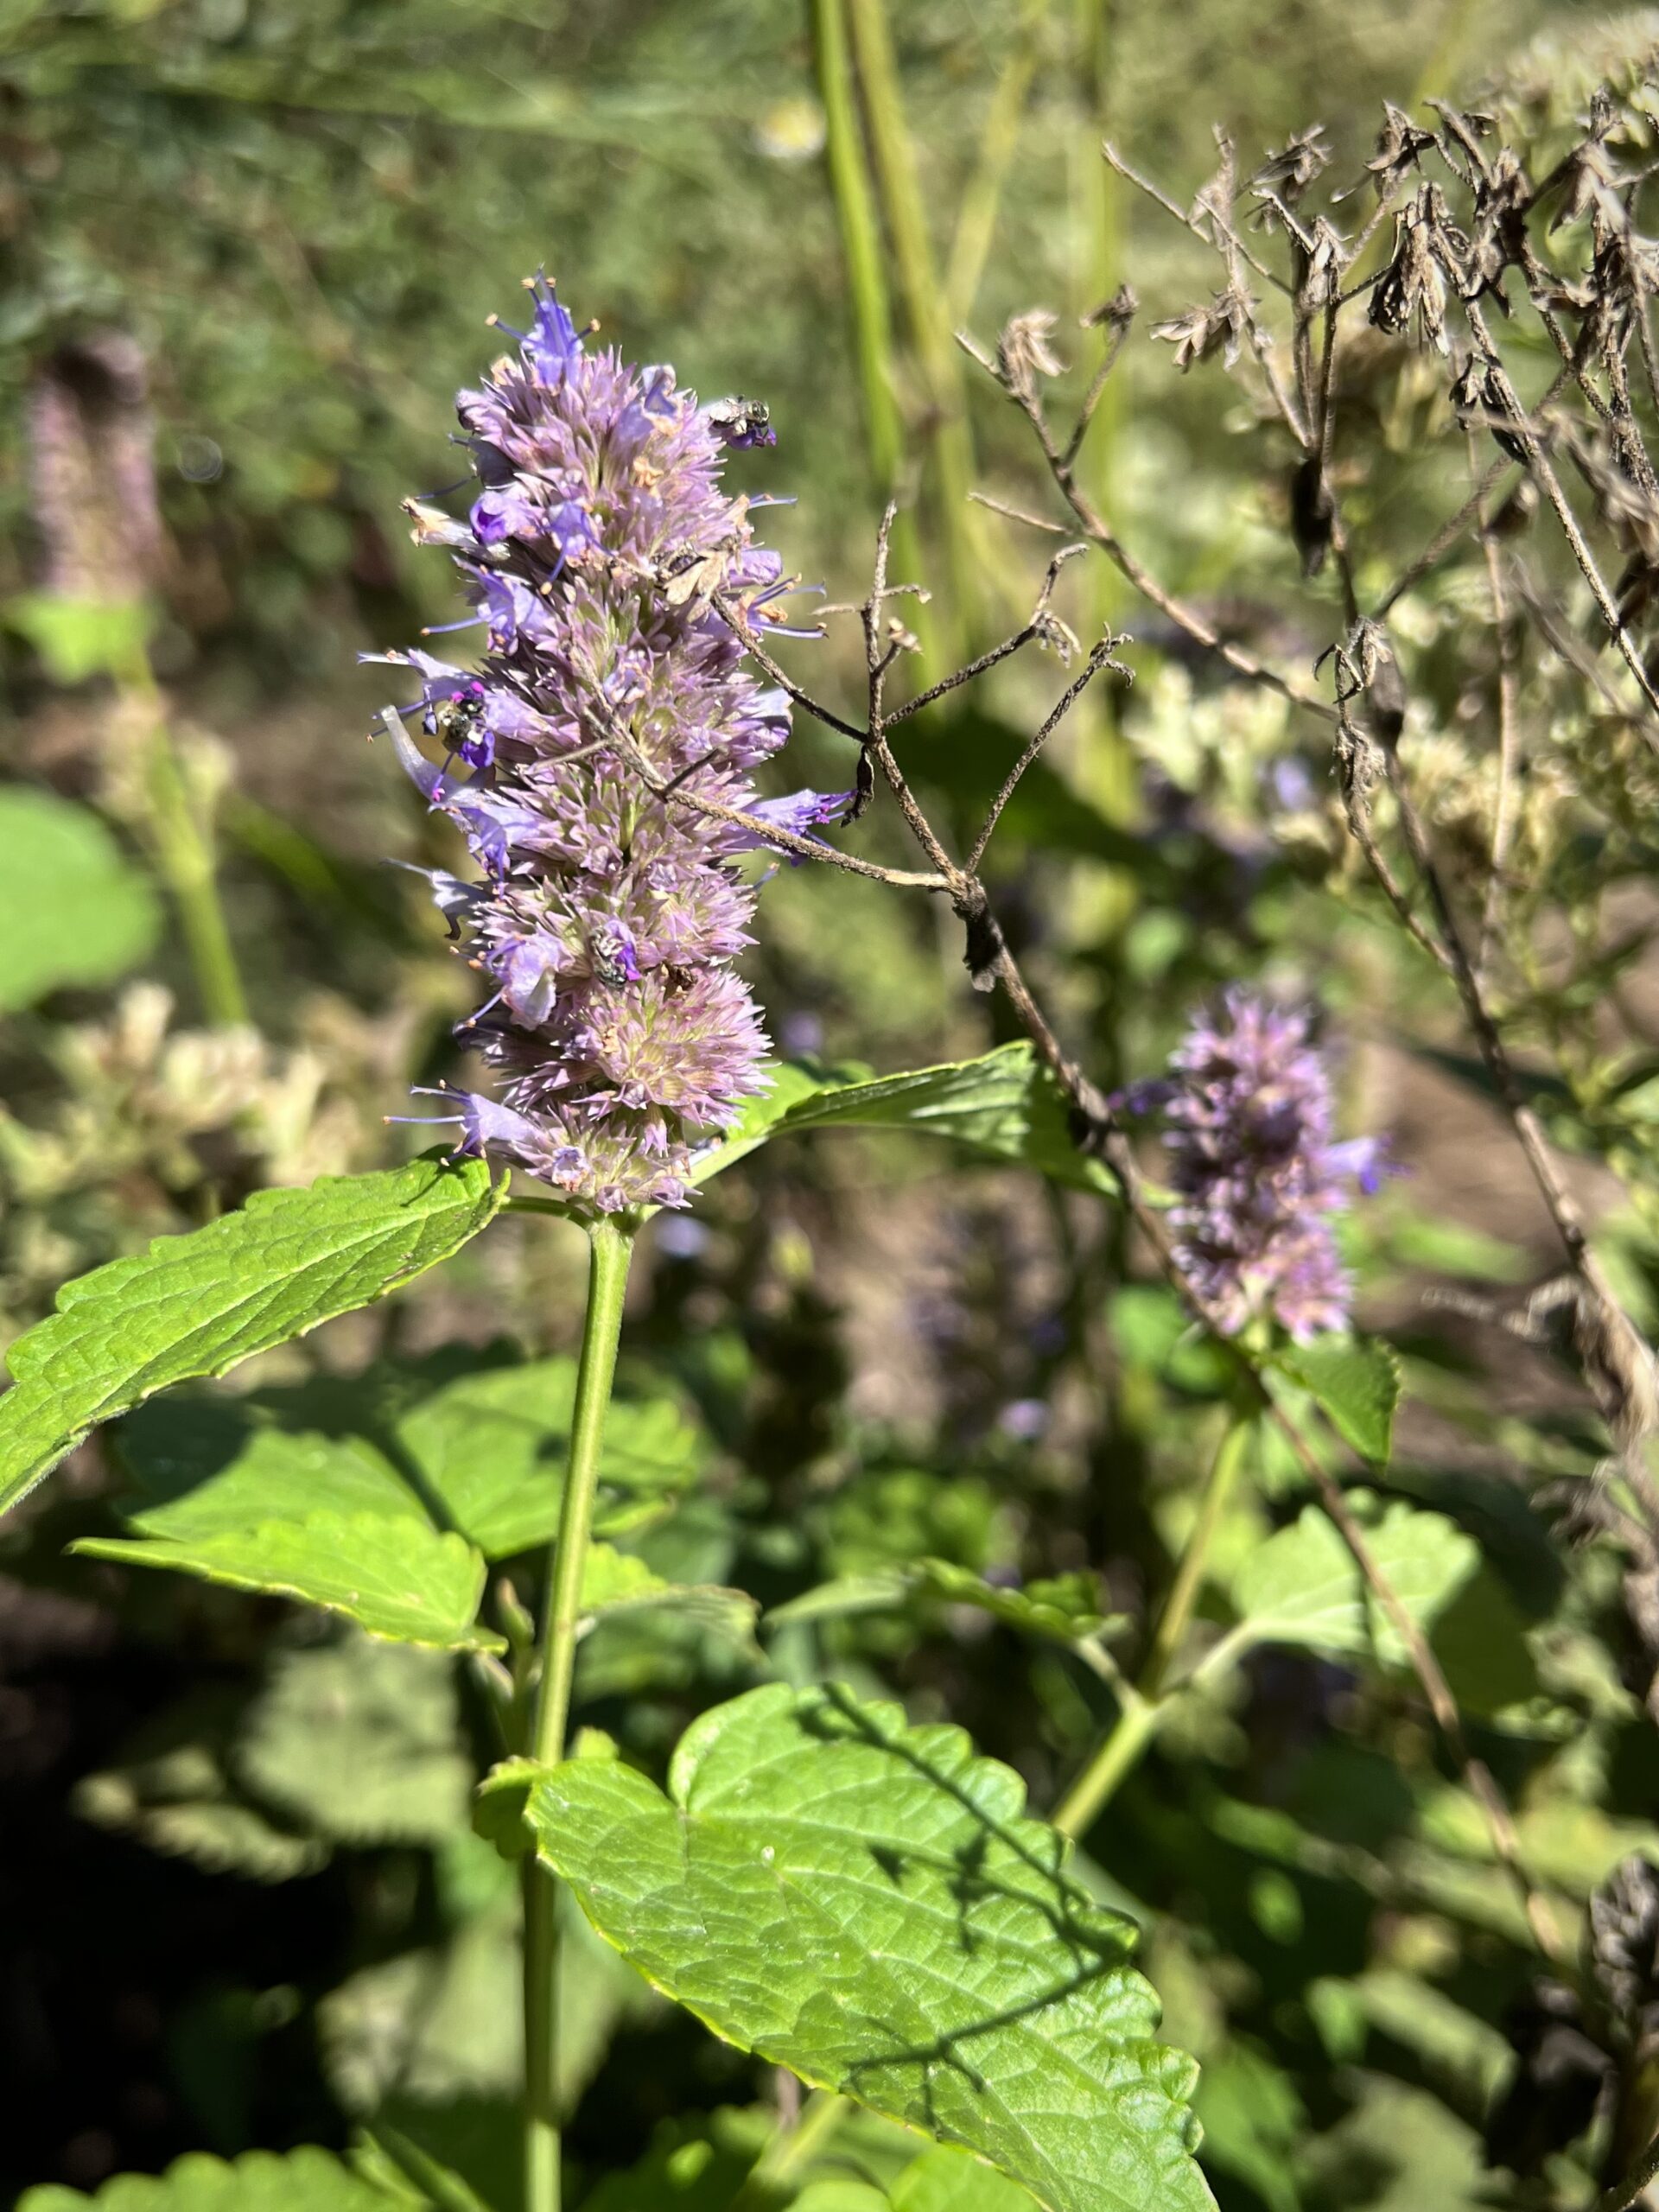 The purple flower of anise hyssop